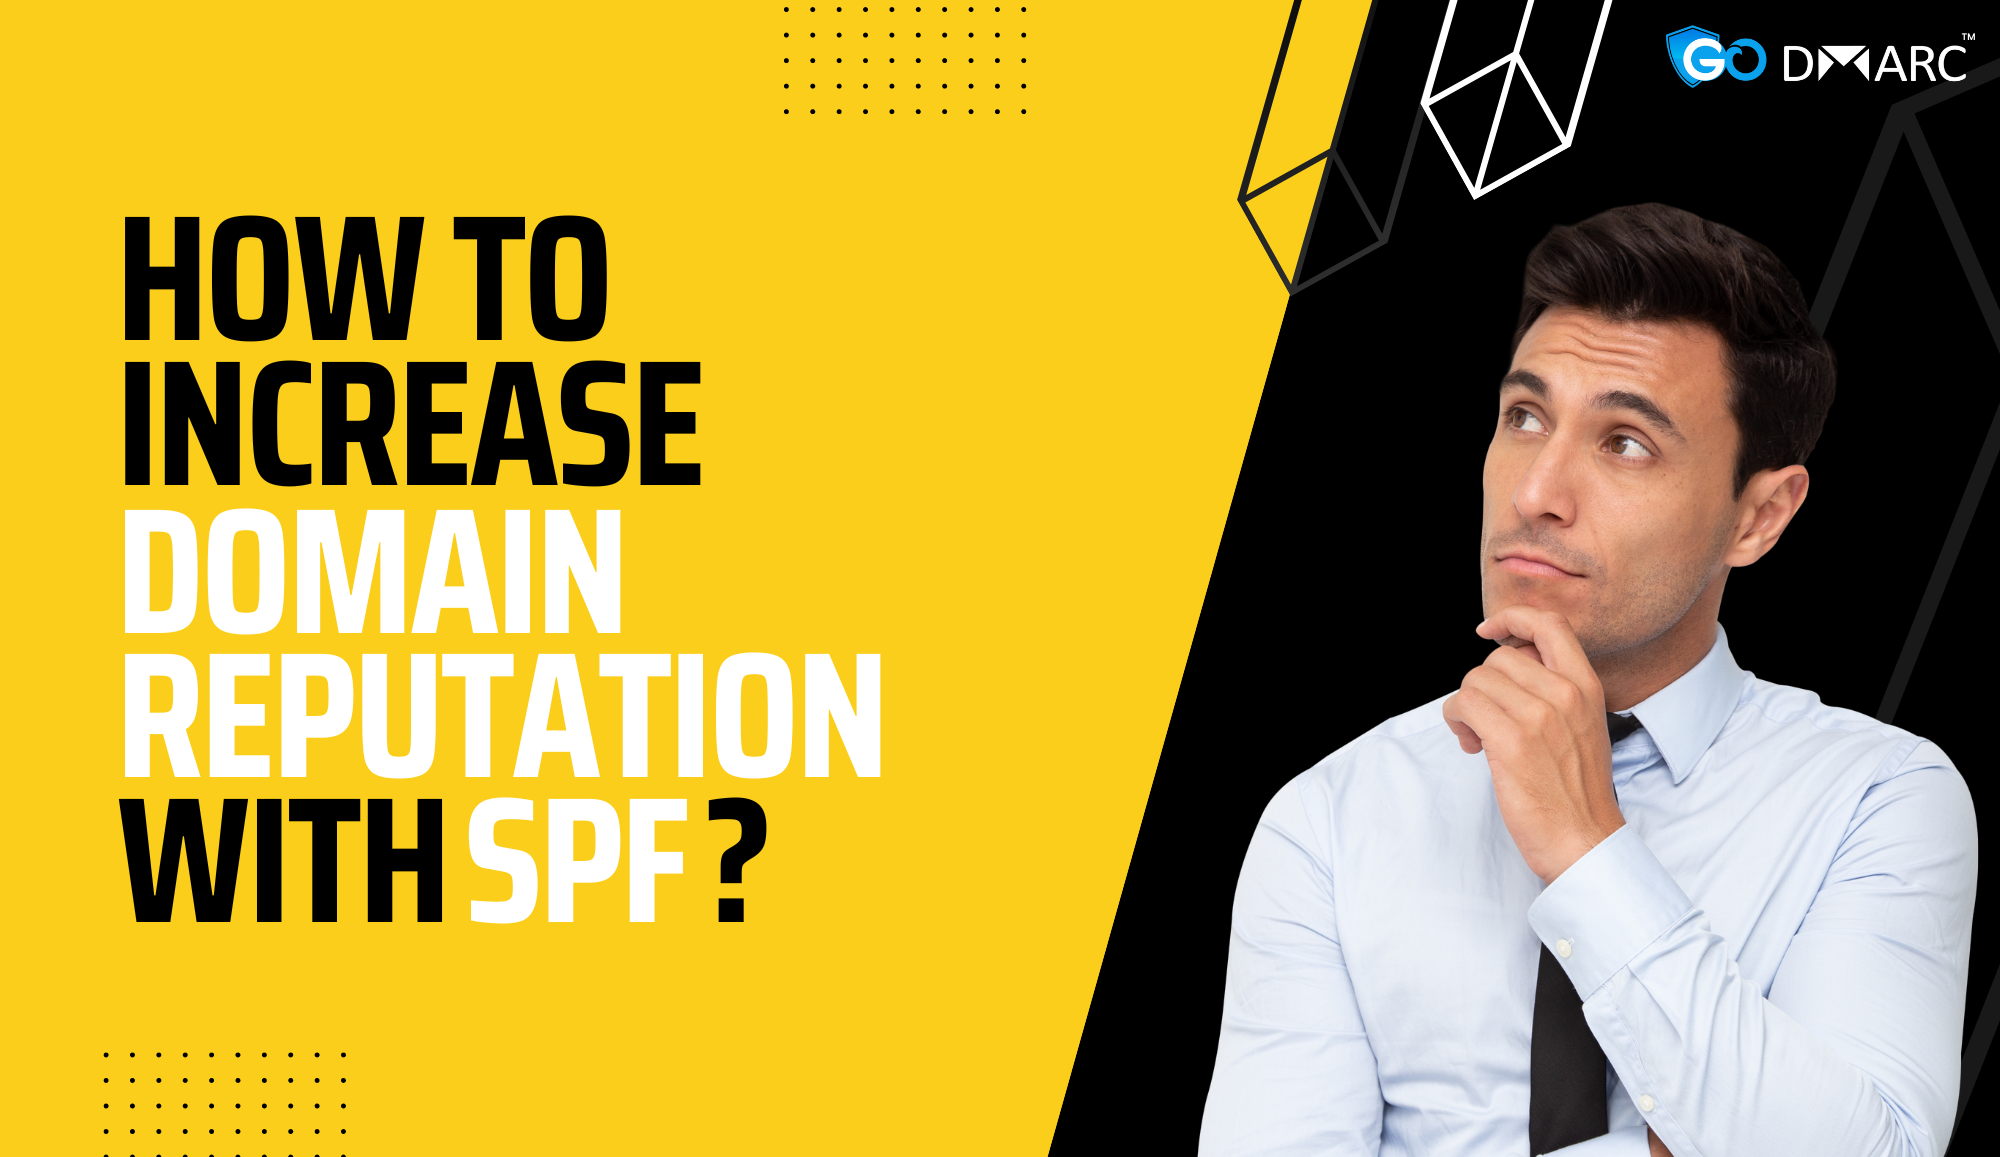 increase domain reputation with spf